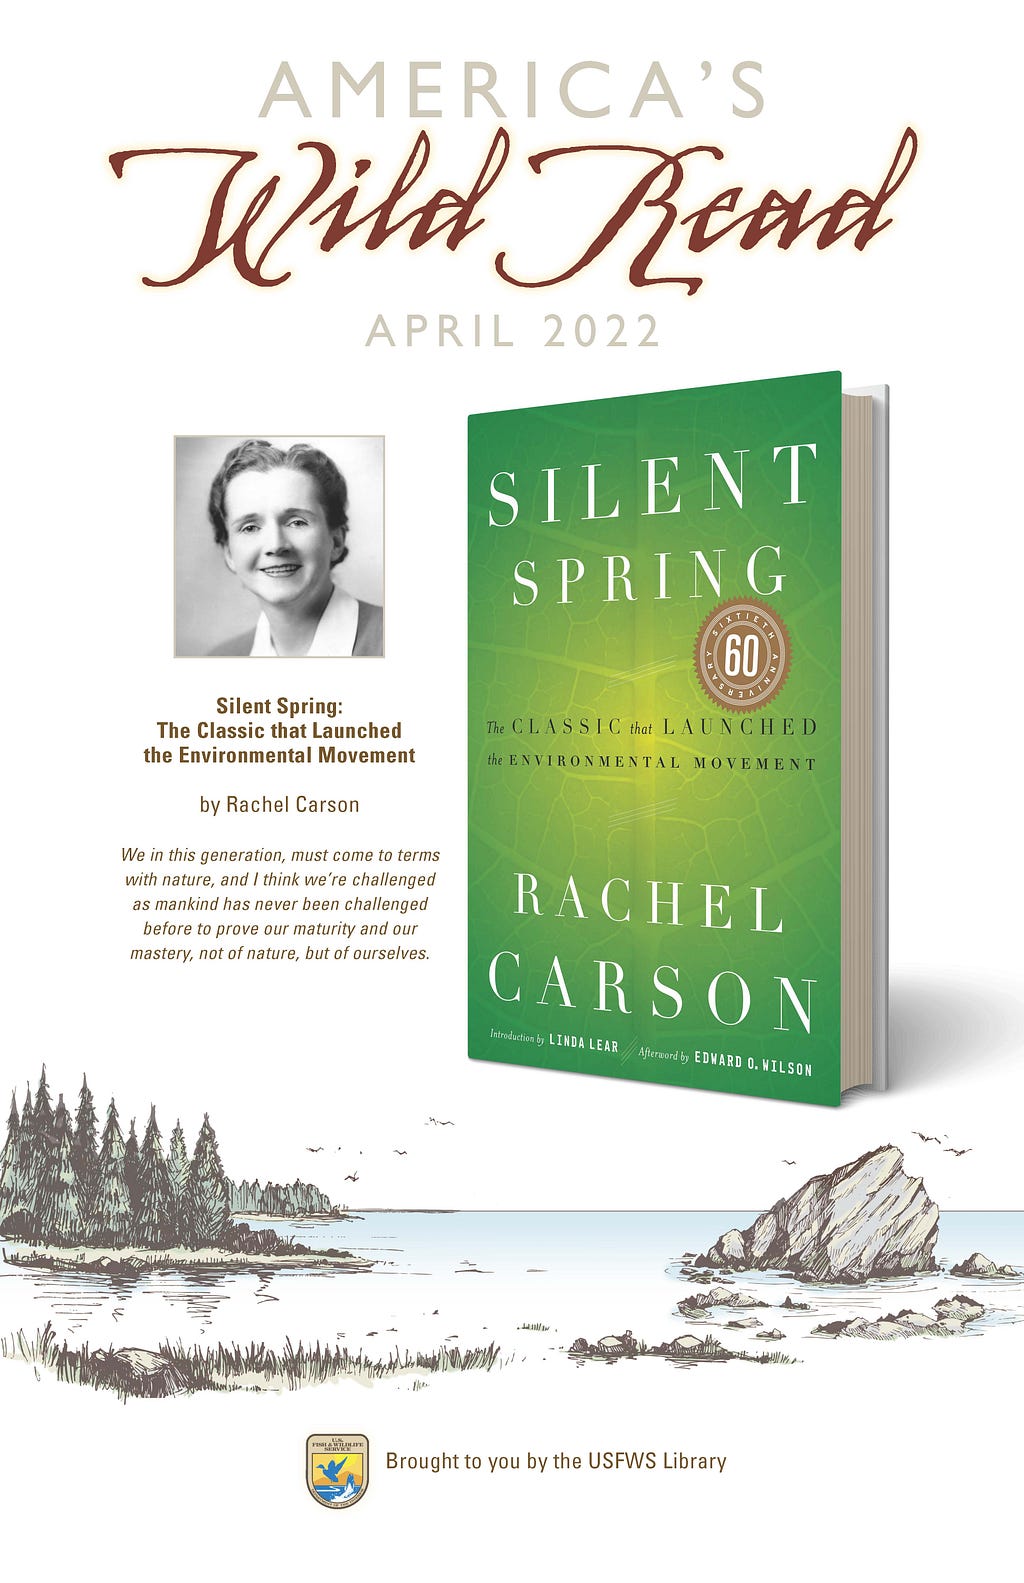 Poster for America’s Wild Read April 2022 with head and shoulders image of author and image of book cover for Silent Spring. Graphics: Richard DeVries/USFWS